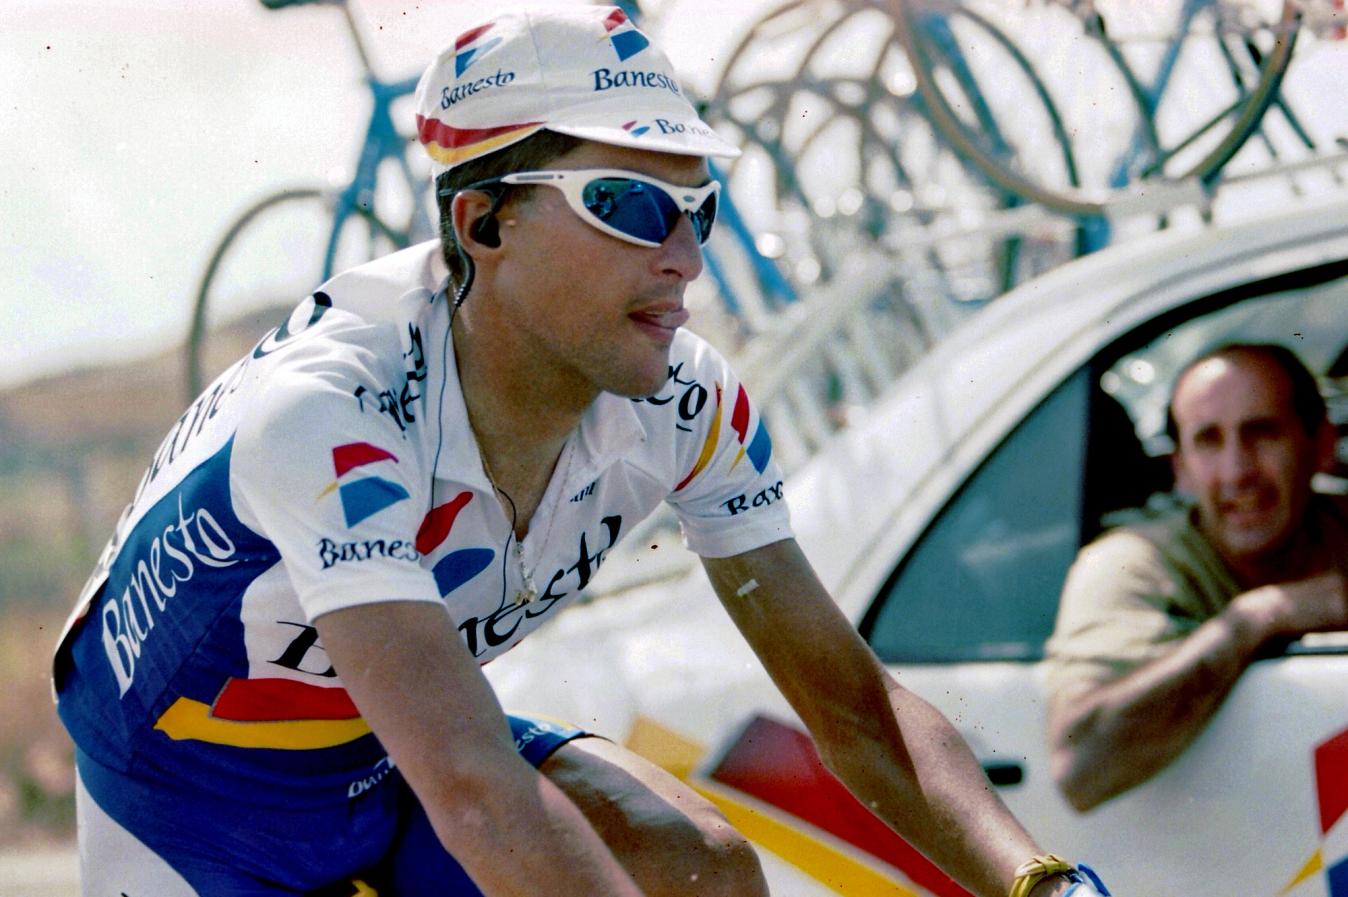 The Pinarello Dyna was used by Jose María Jiménez and his Banesto team in the mid-90s